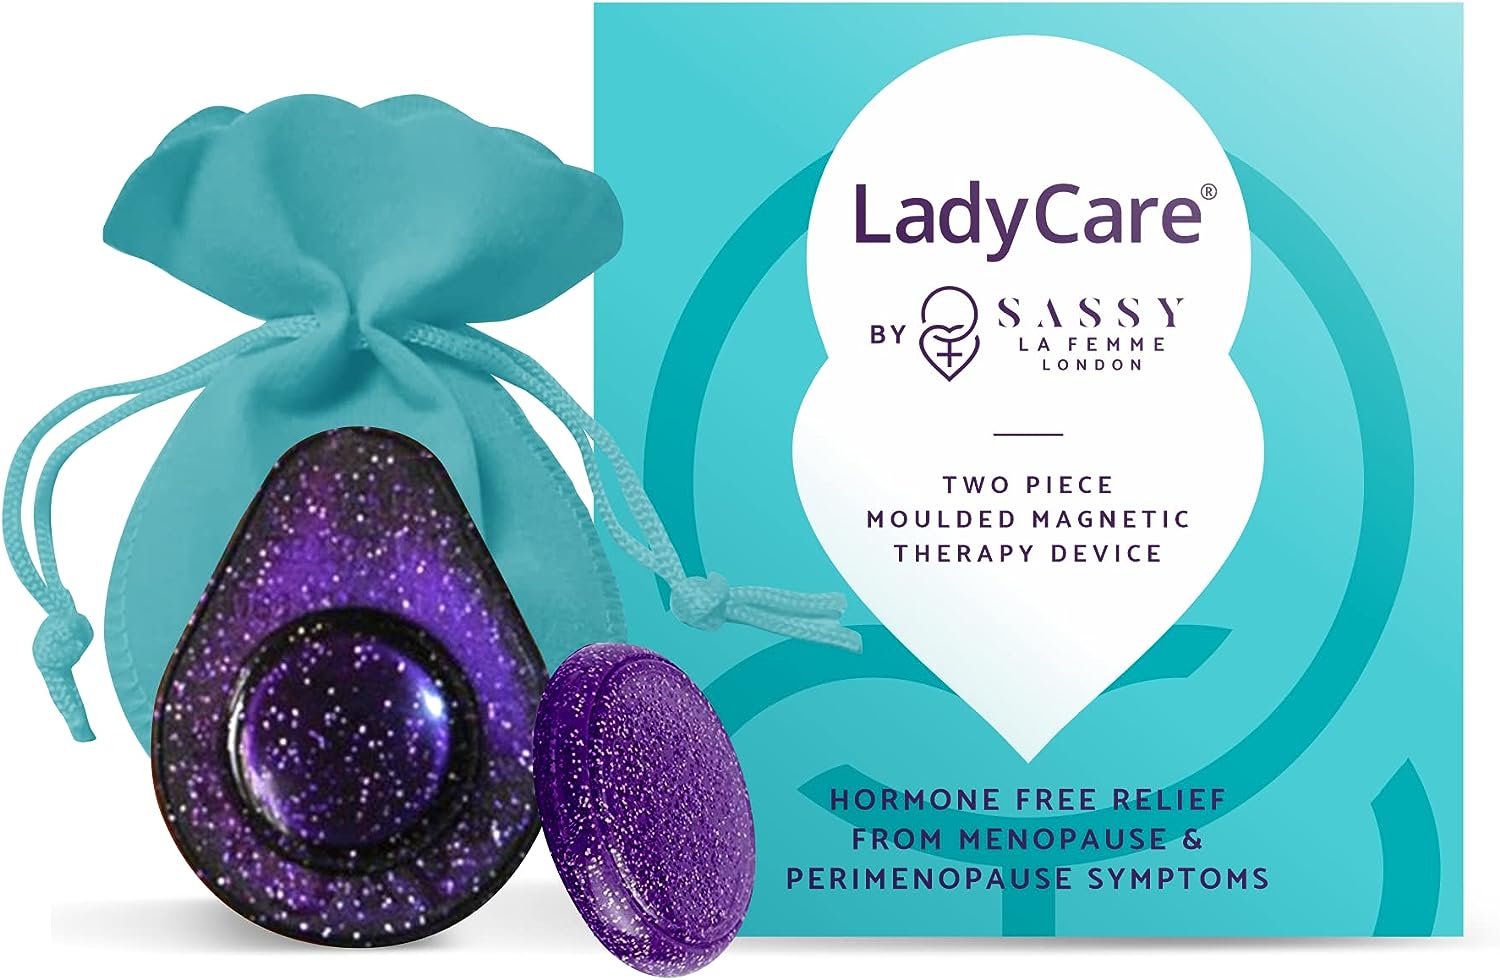 LadyCare Plus – Discreet Device for Menopause, Over 2,000 Gauss, HRT Alternative Review